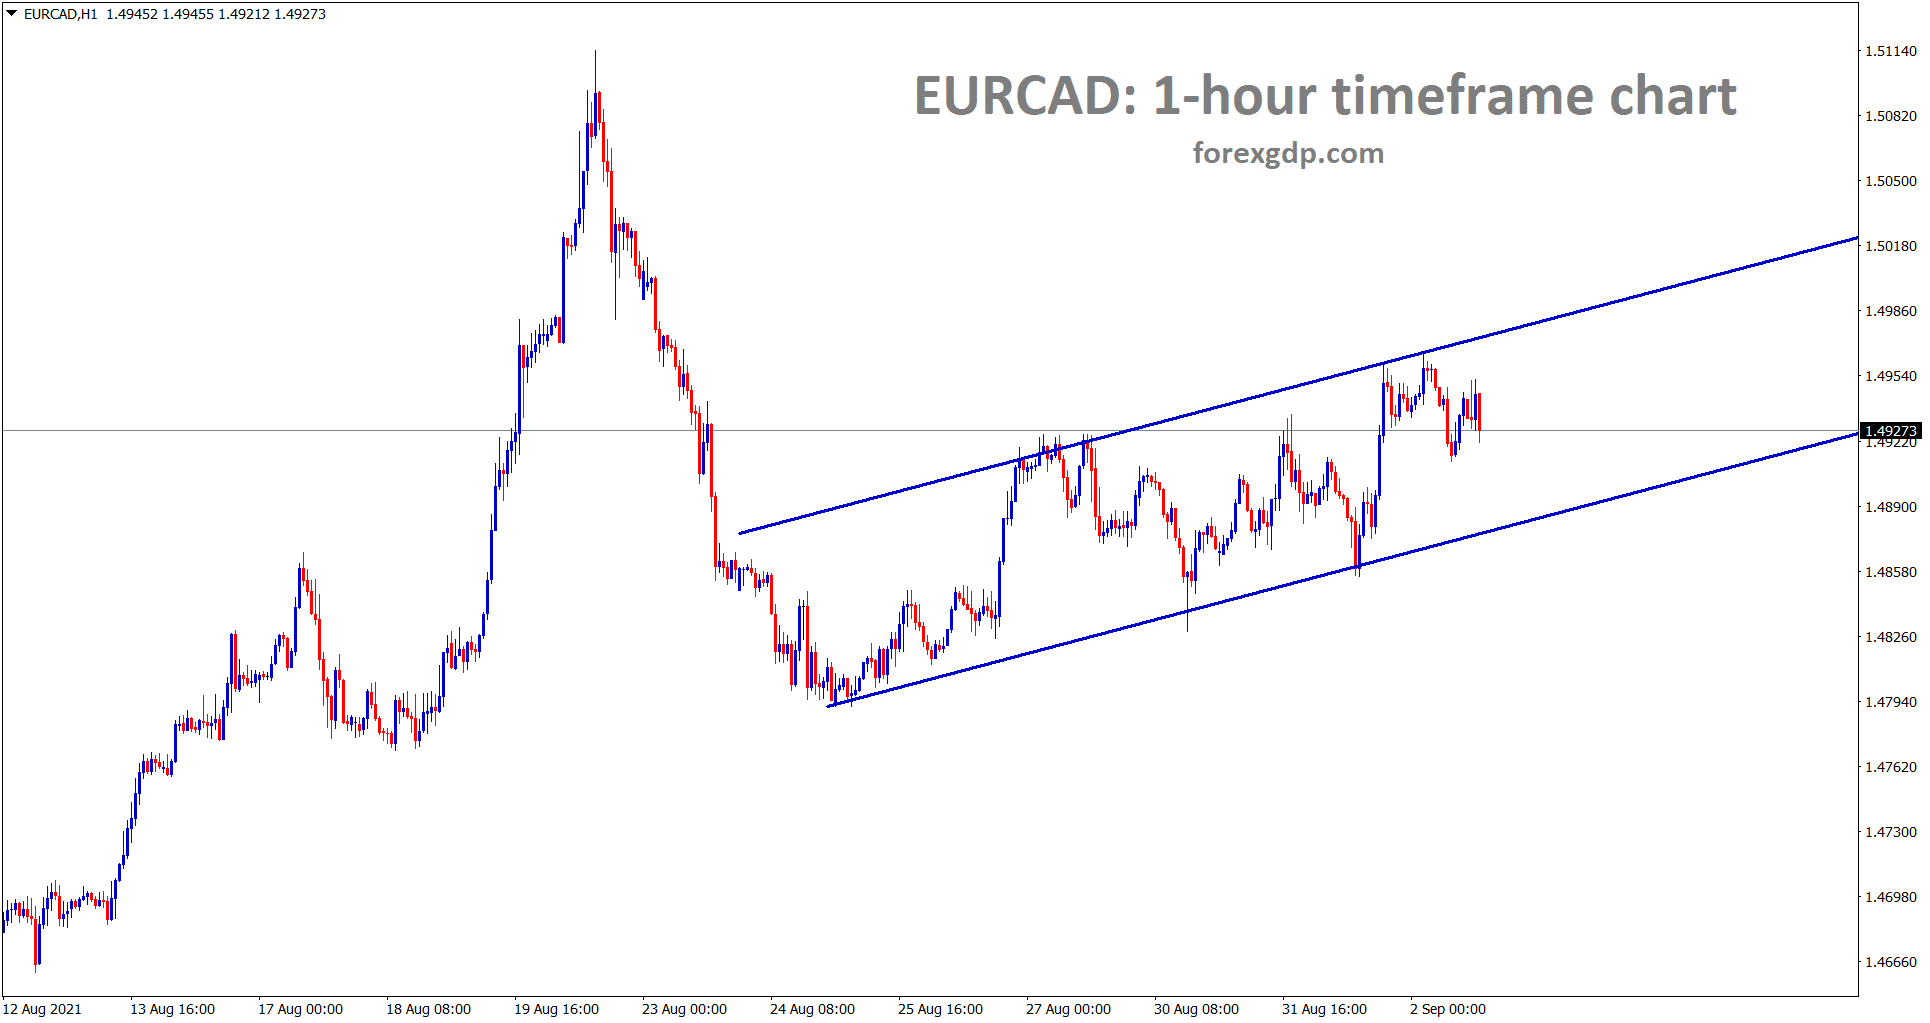 EURCAD is moving in a minor ascending channel